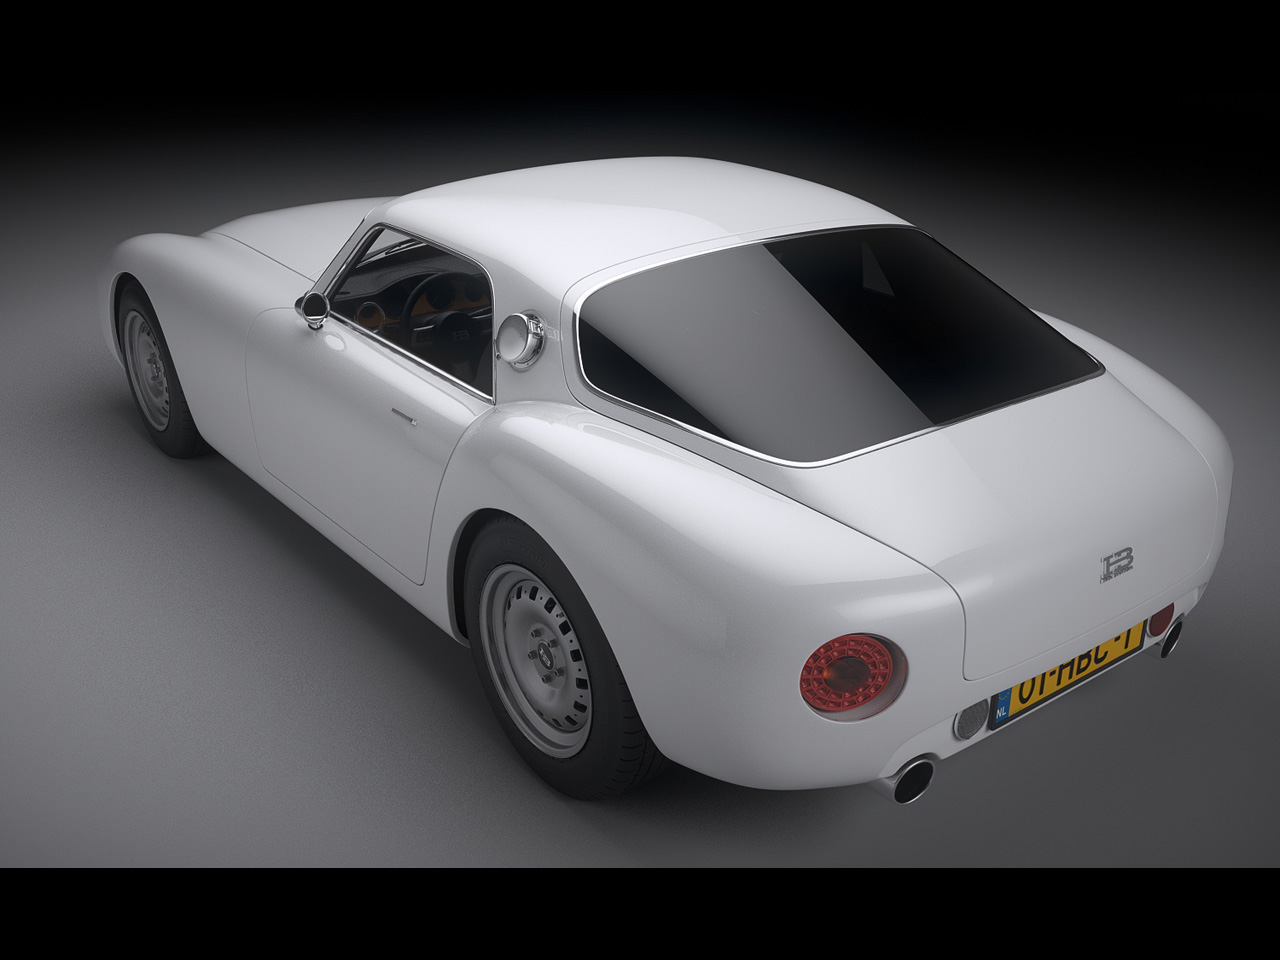 2014 HB Coupe Classic & Road Racer Renderings